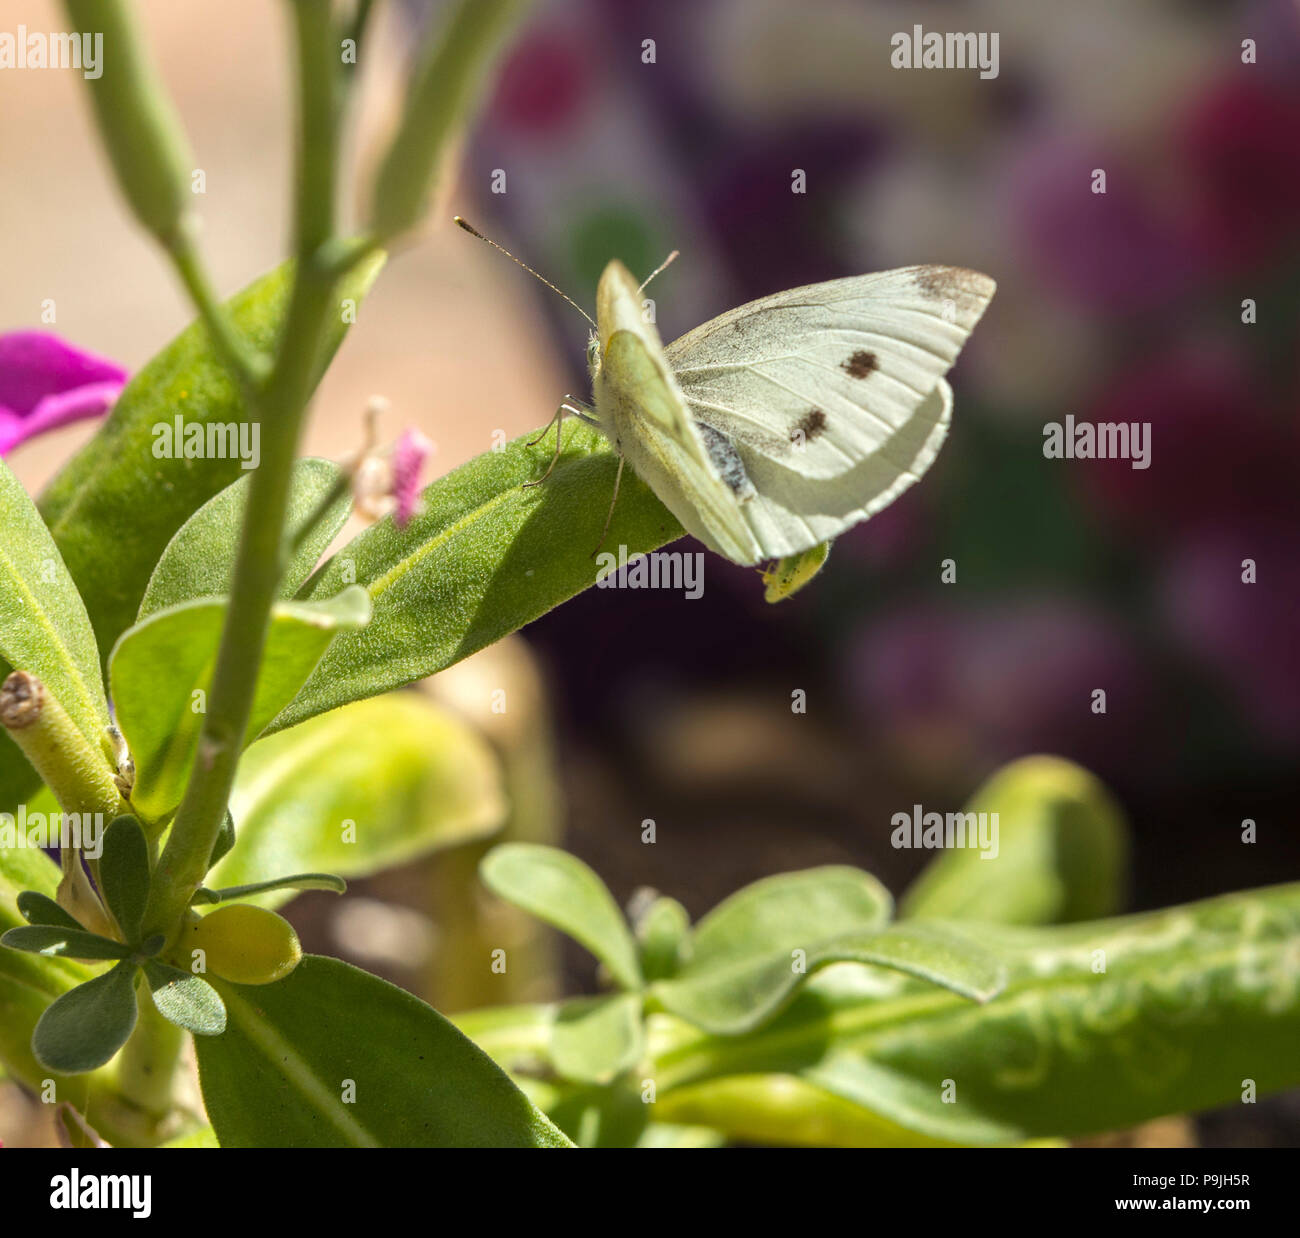 Small white (cabbage white) butterfly on stocks (Matthiola incana) in a garden. Stock Photo